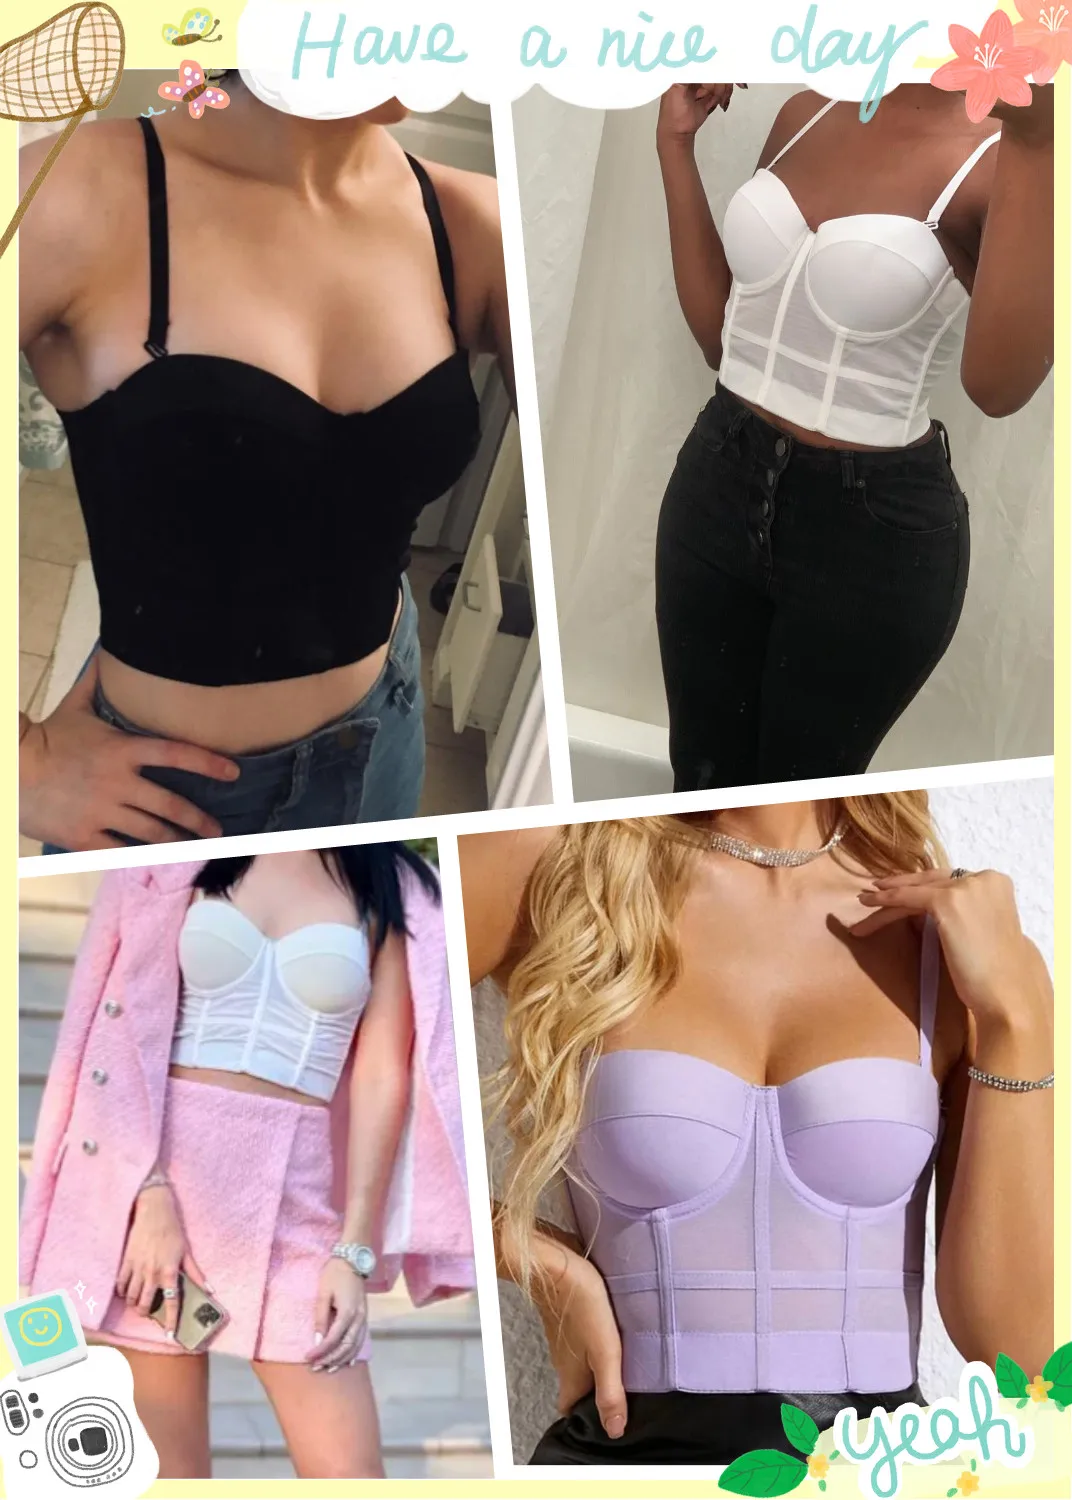 Sexy Corset Shaper Ladies Bustier Blusas Cropped Top Summer